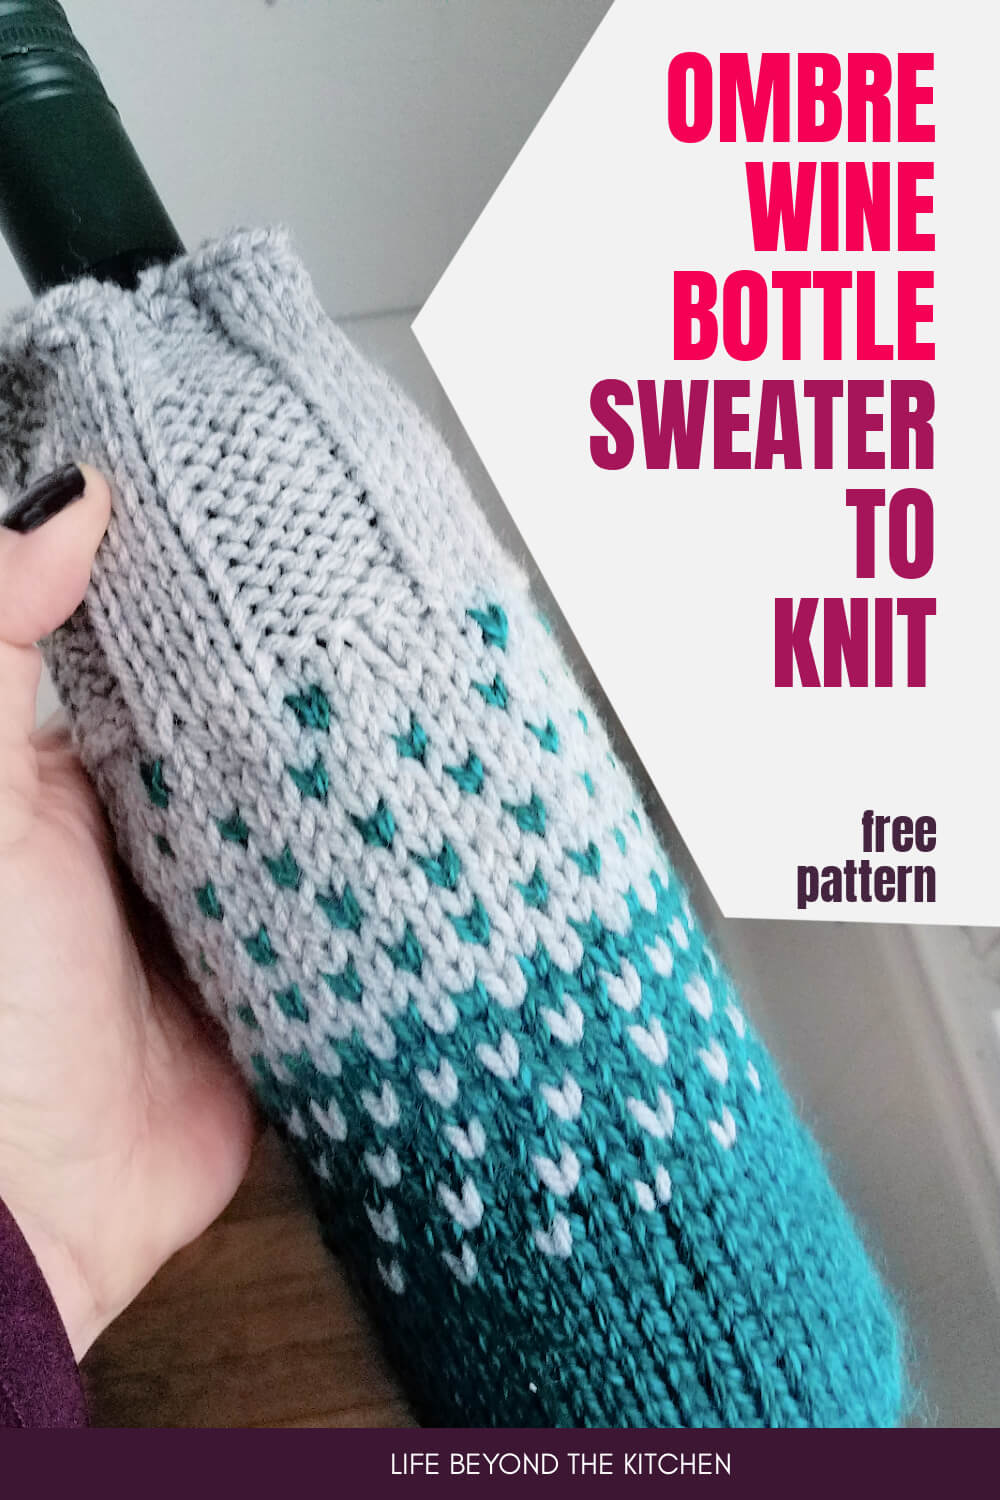 How to Make A Knitted Ombre Wine Bottle Sweater